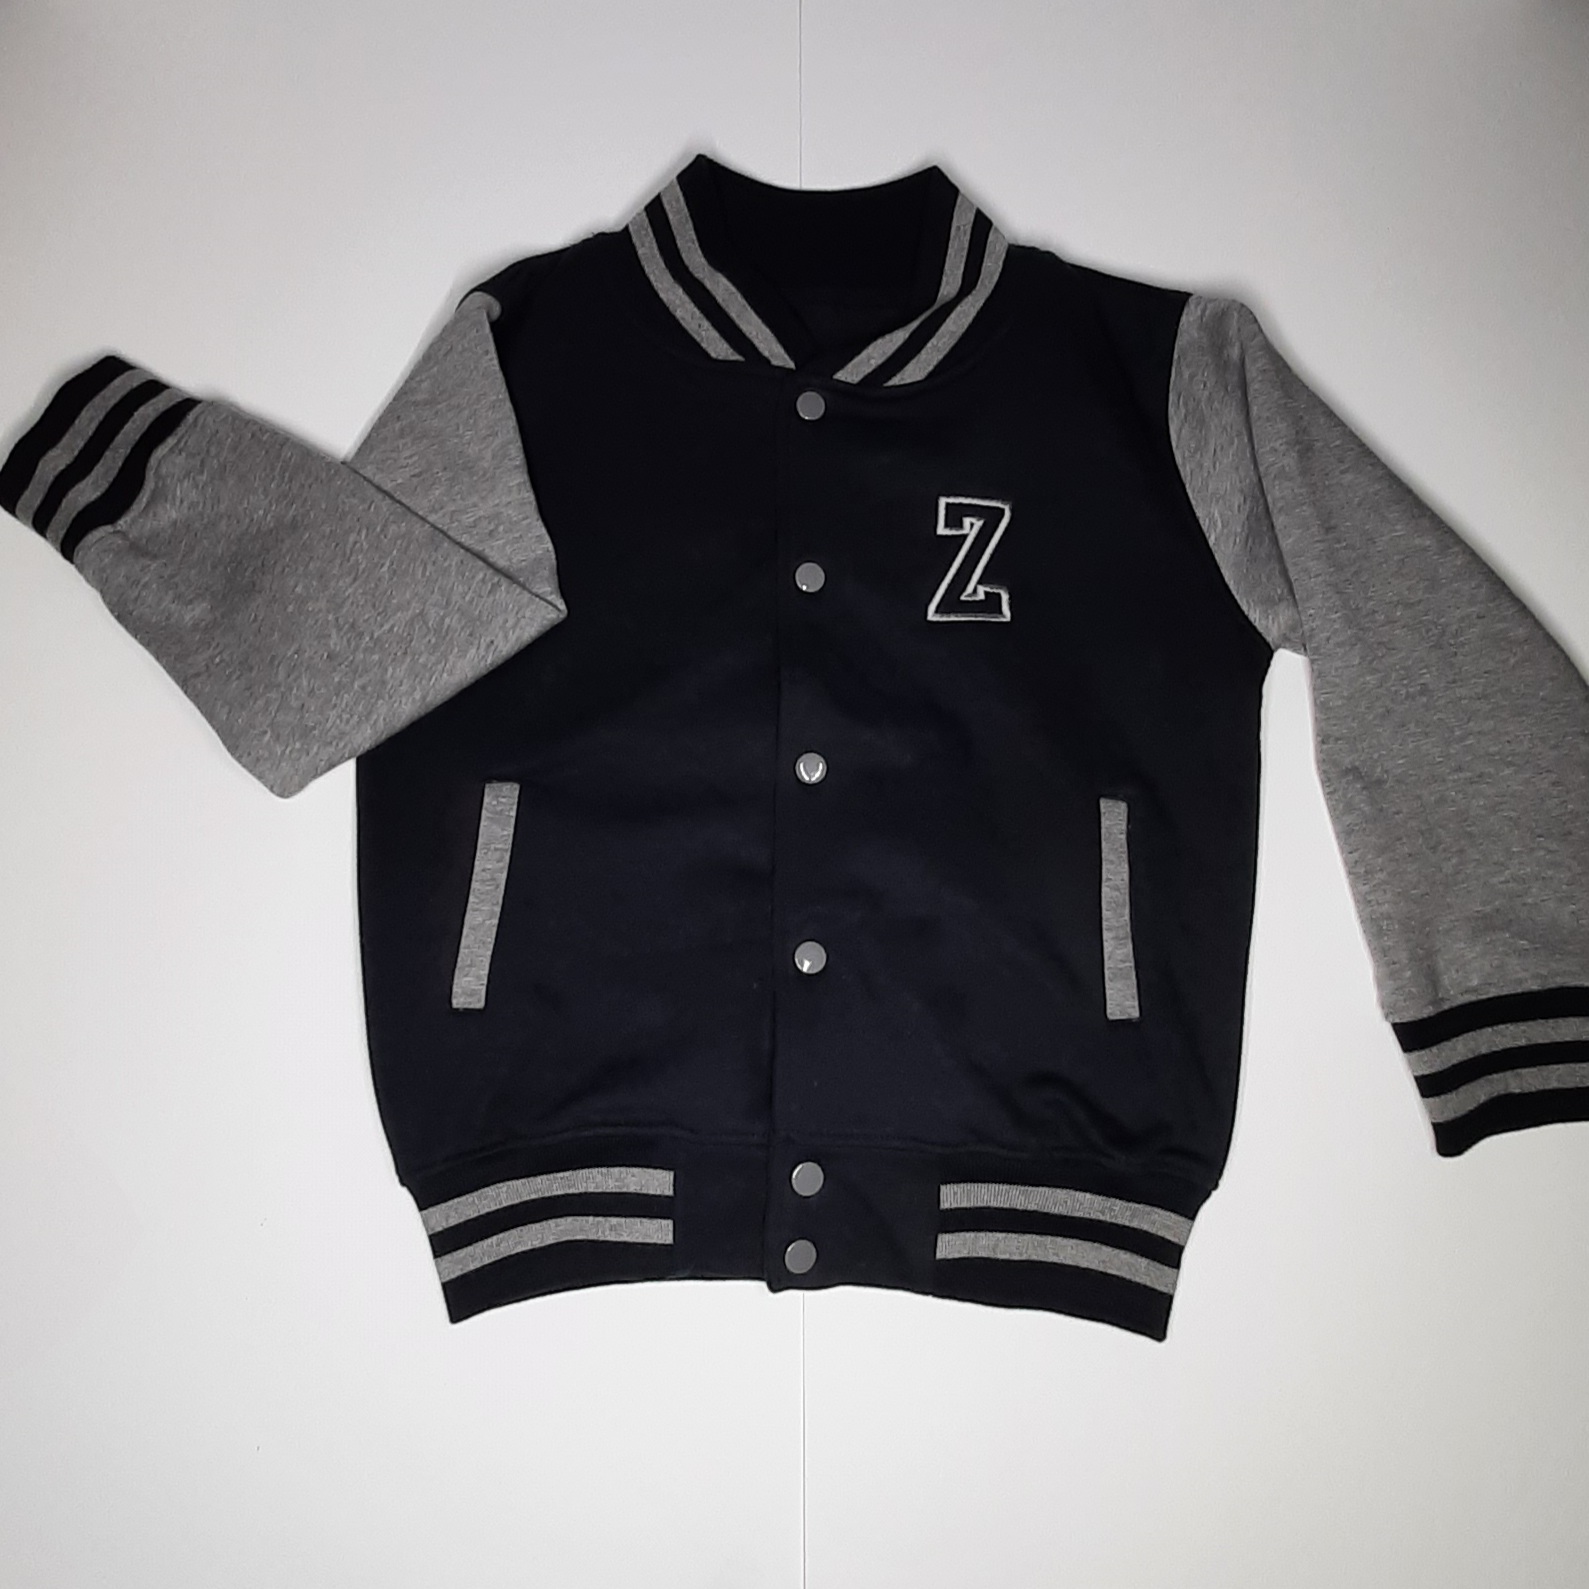 Children's varsity jacket on model in black and grey with embroidered initial laid out